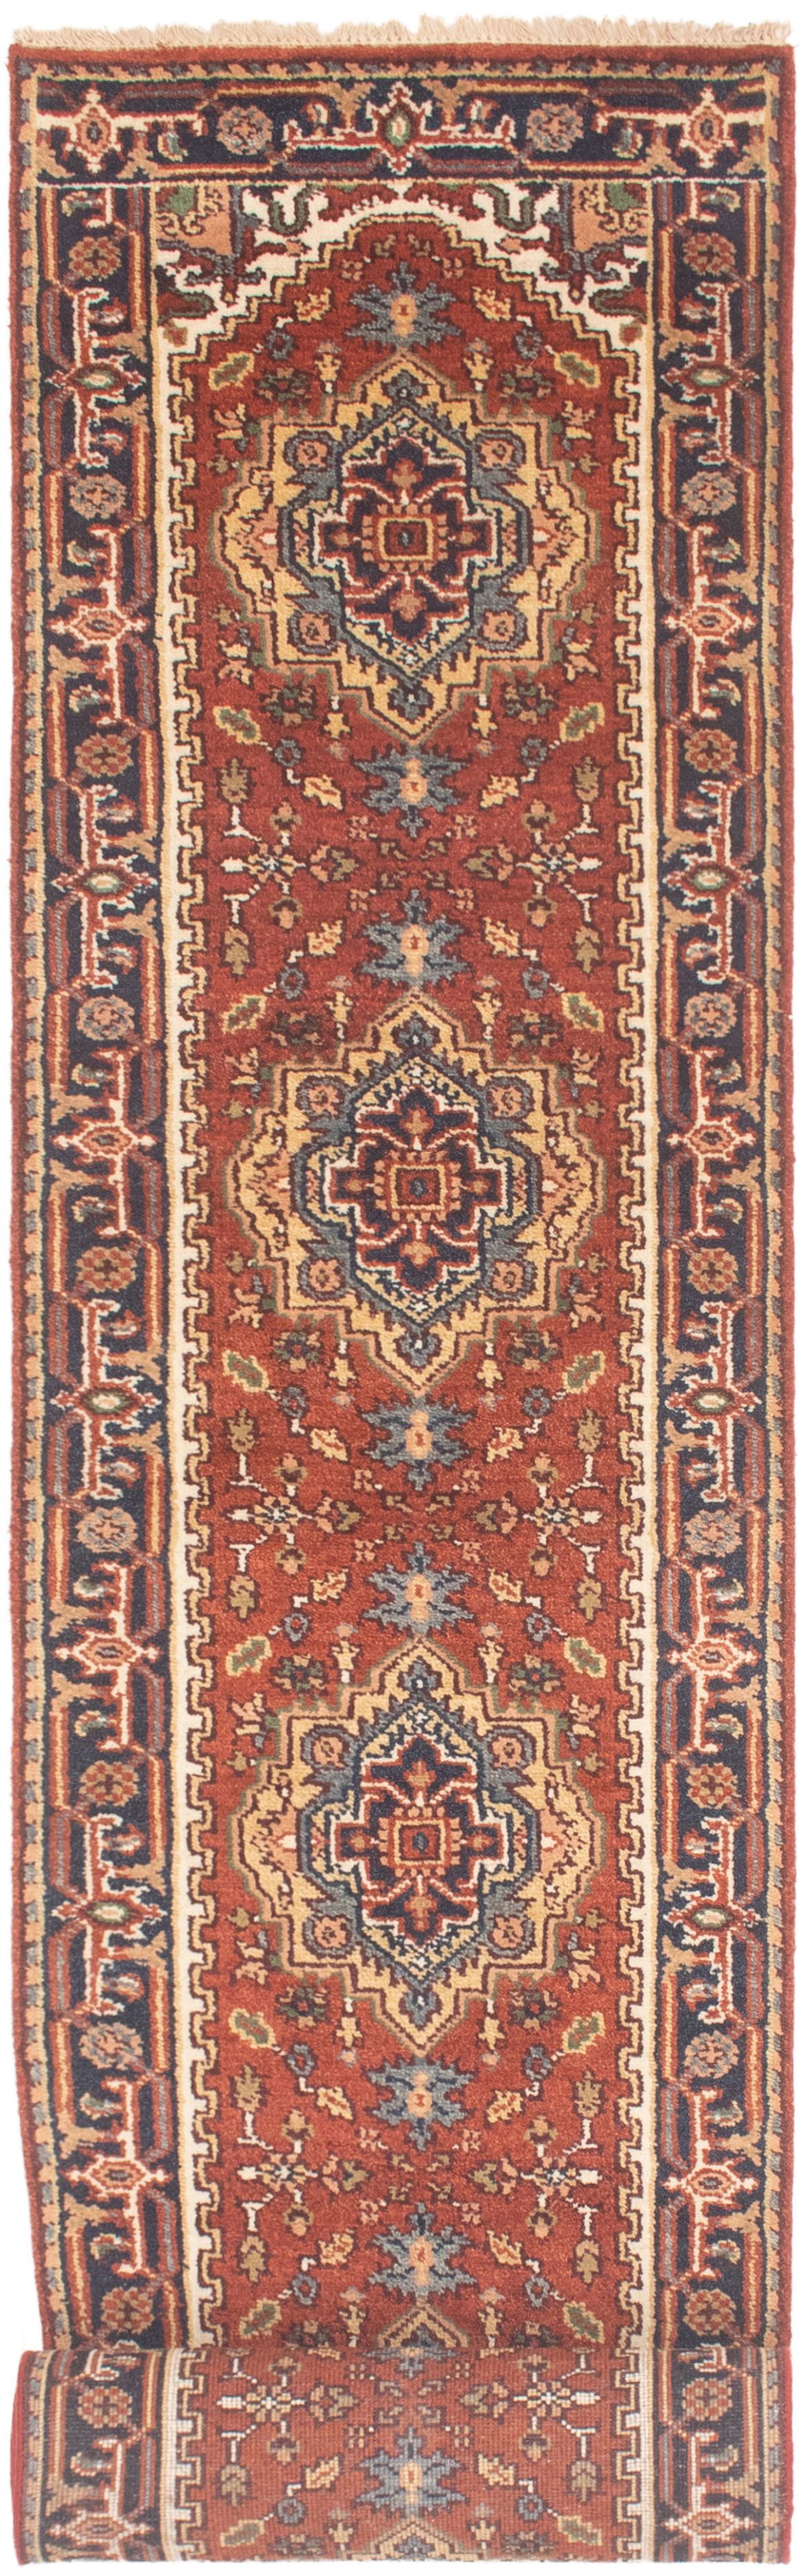 Hand-knotted Serapi Heritage Dark Copper Wool Rug 2'6" x 19'10"  Size: 2'6" x 19'10"  